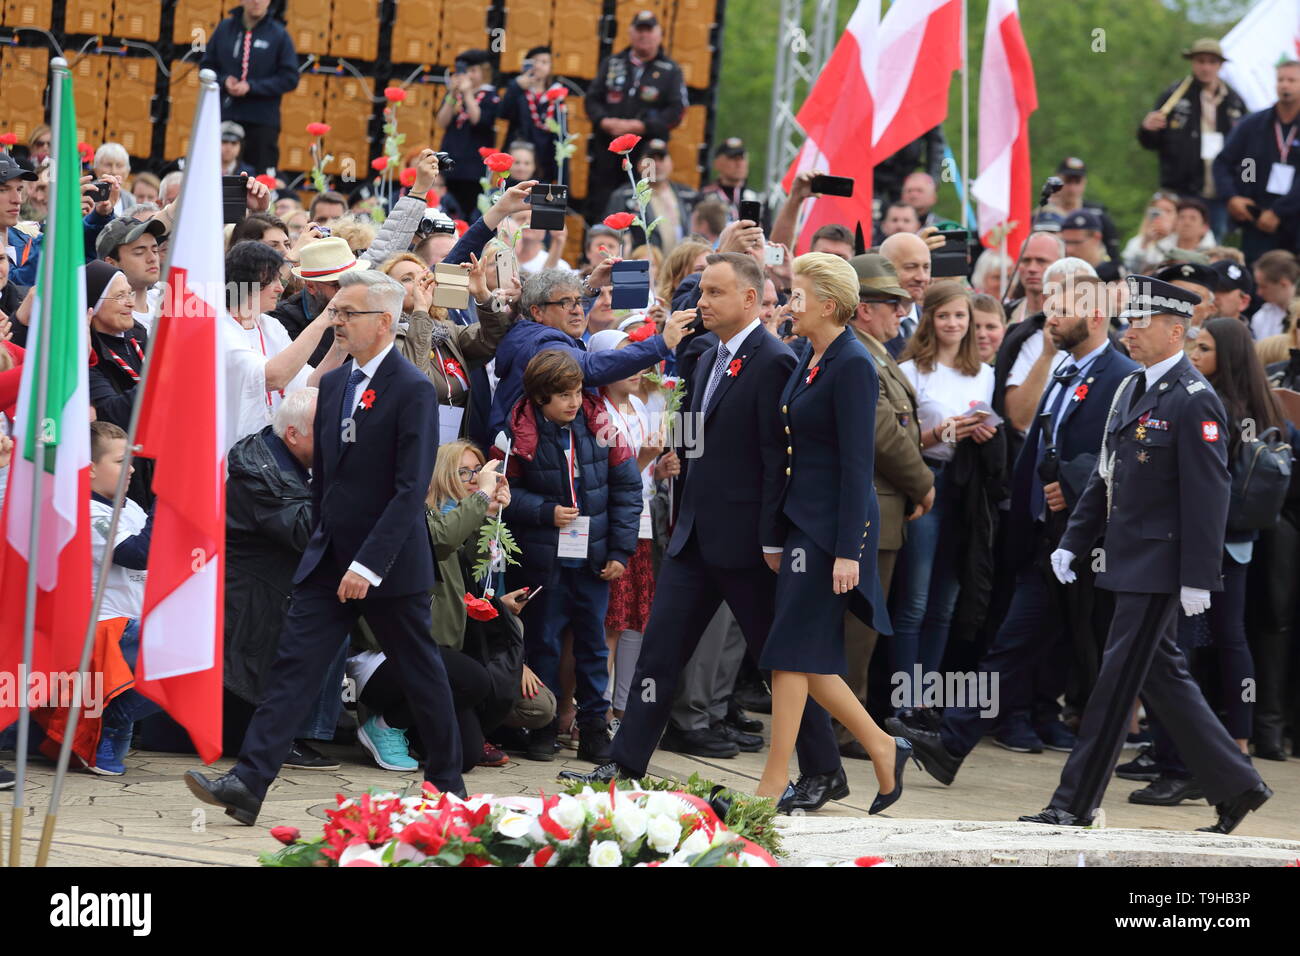 Cassino, Italy - May 18, 2019: The entry of Polish President Andrzej Duda and his wife to the Polish military cemetery for celebrations on the occasion of the 75th anniversary of the Battle of Montecassino Stock Photo